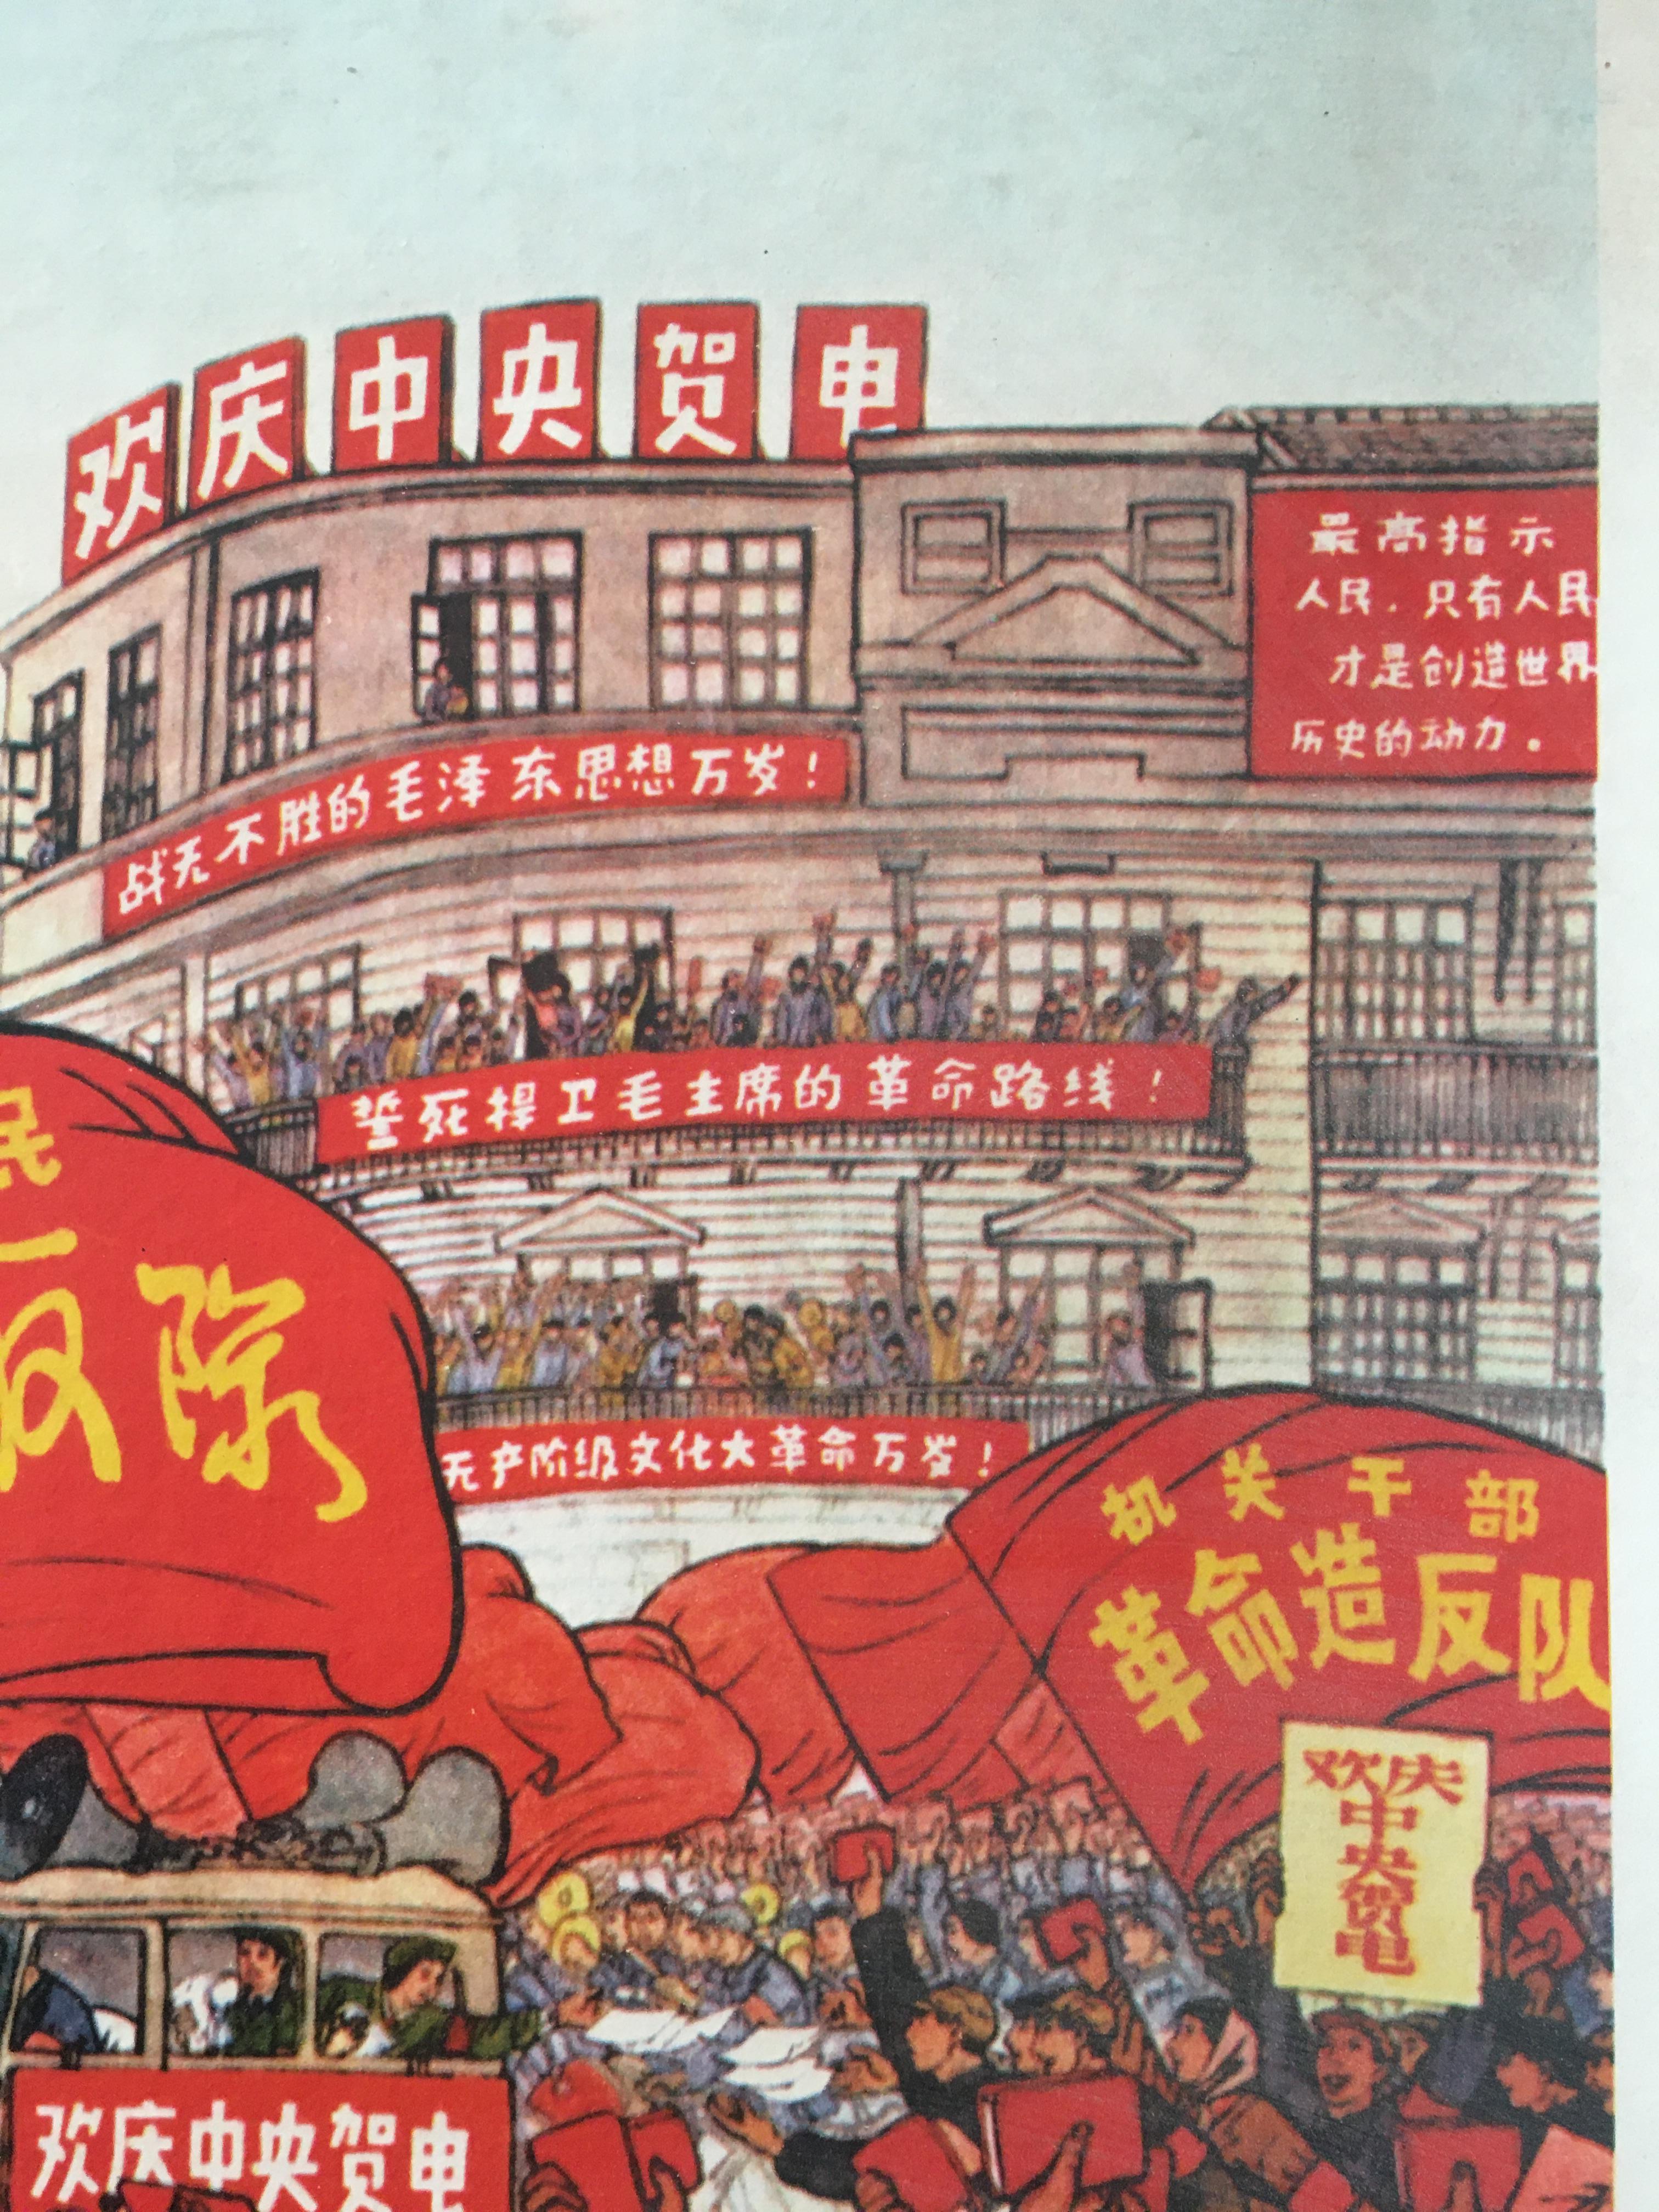 Original Vintage Chinese Propaganda Poster Featuring Mao's Little Red Book In Good Condition For Sale In Melbourne, Victoria